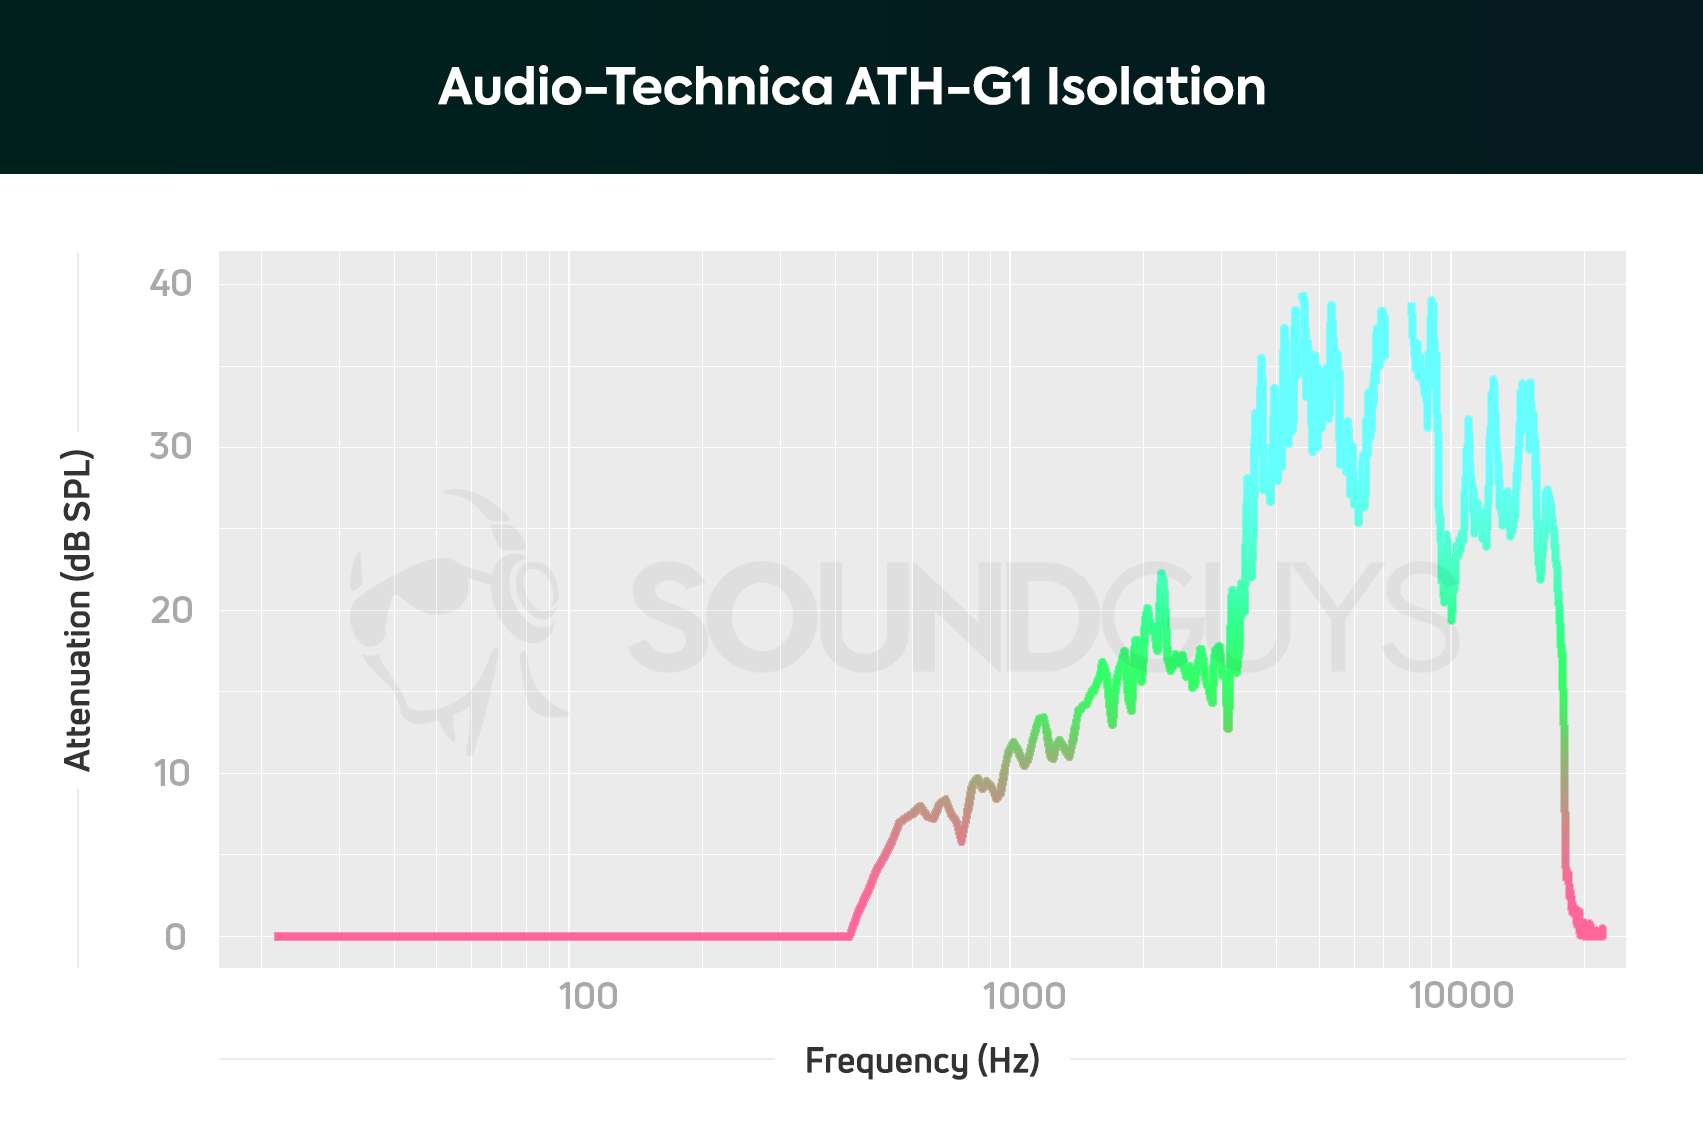 The Audio-Technica ATH-G1 isolation chart.